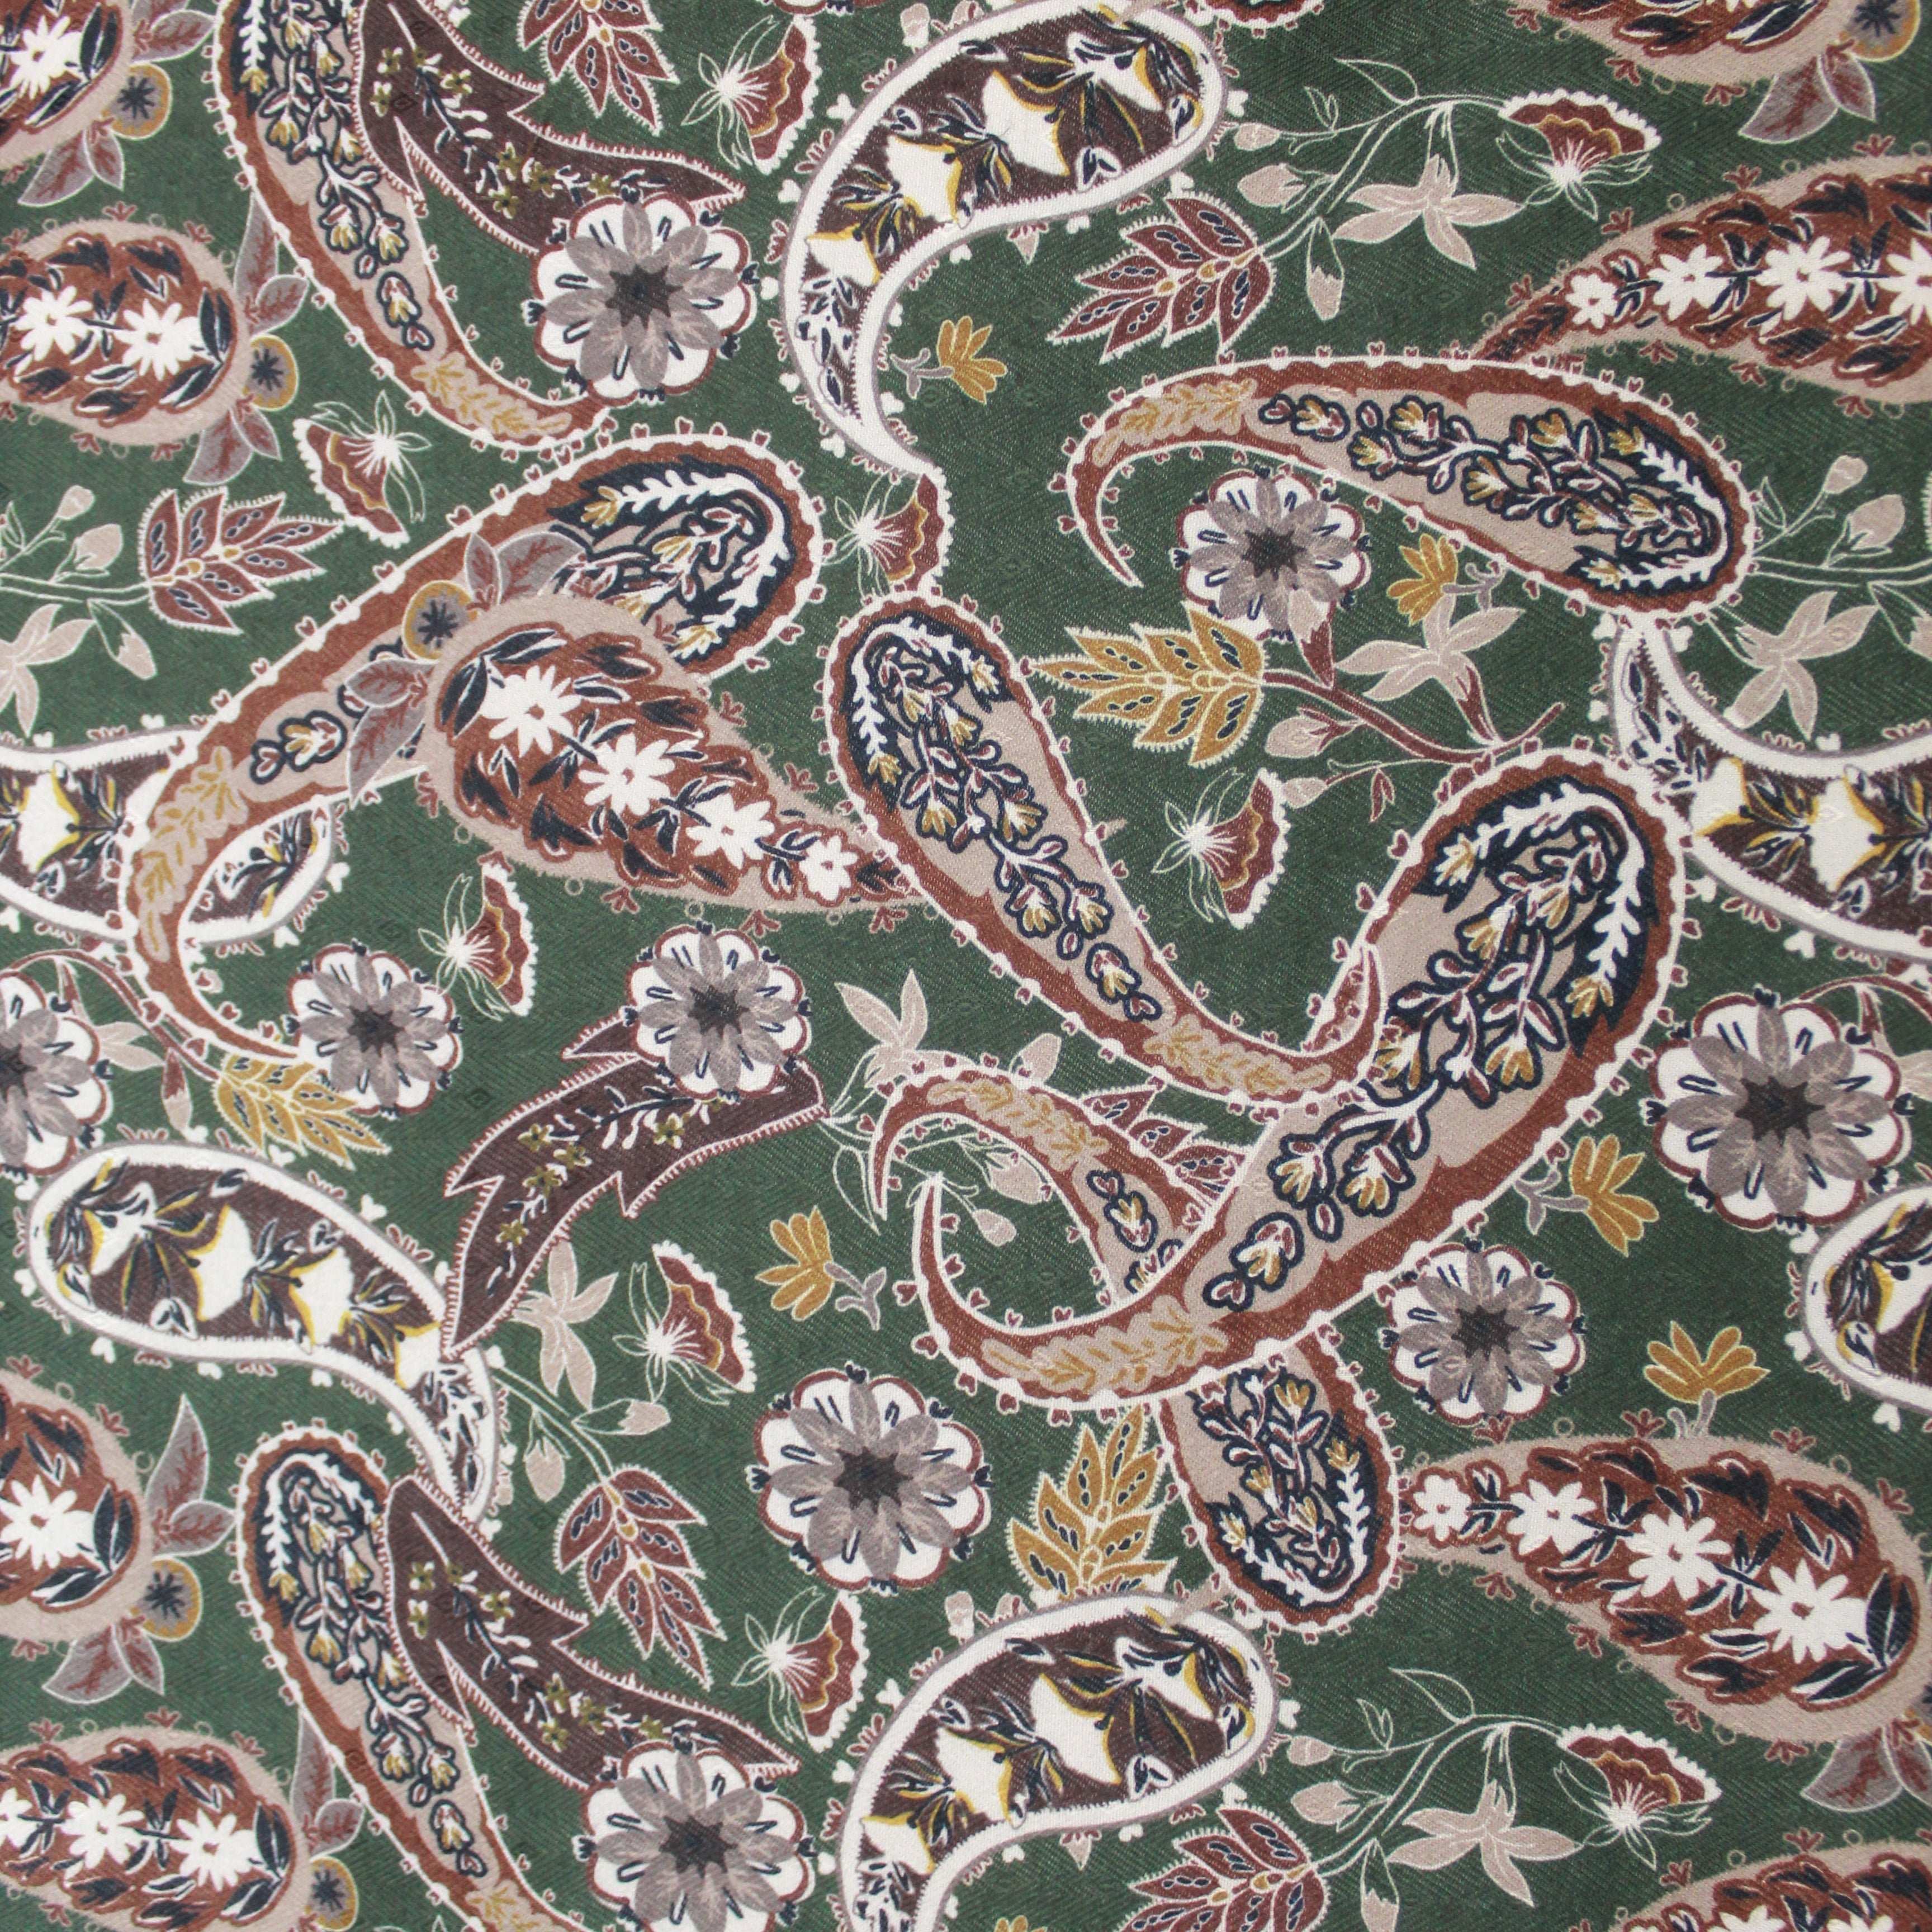 3 Metres Super Soft Printed Cashmere Effect Floral Fabric  - Paisley -45" Wide Dark Green